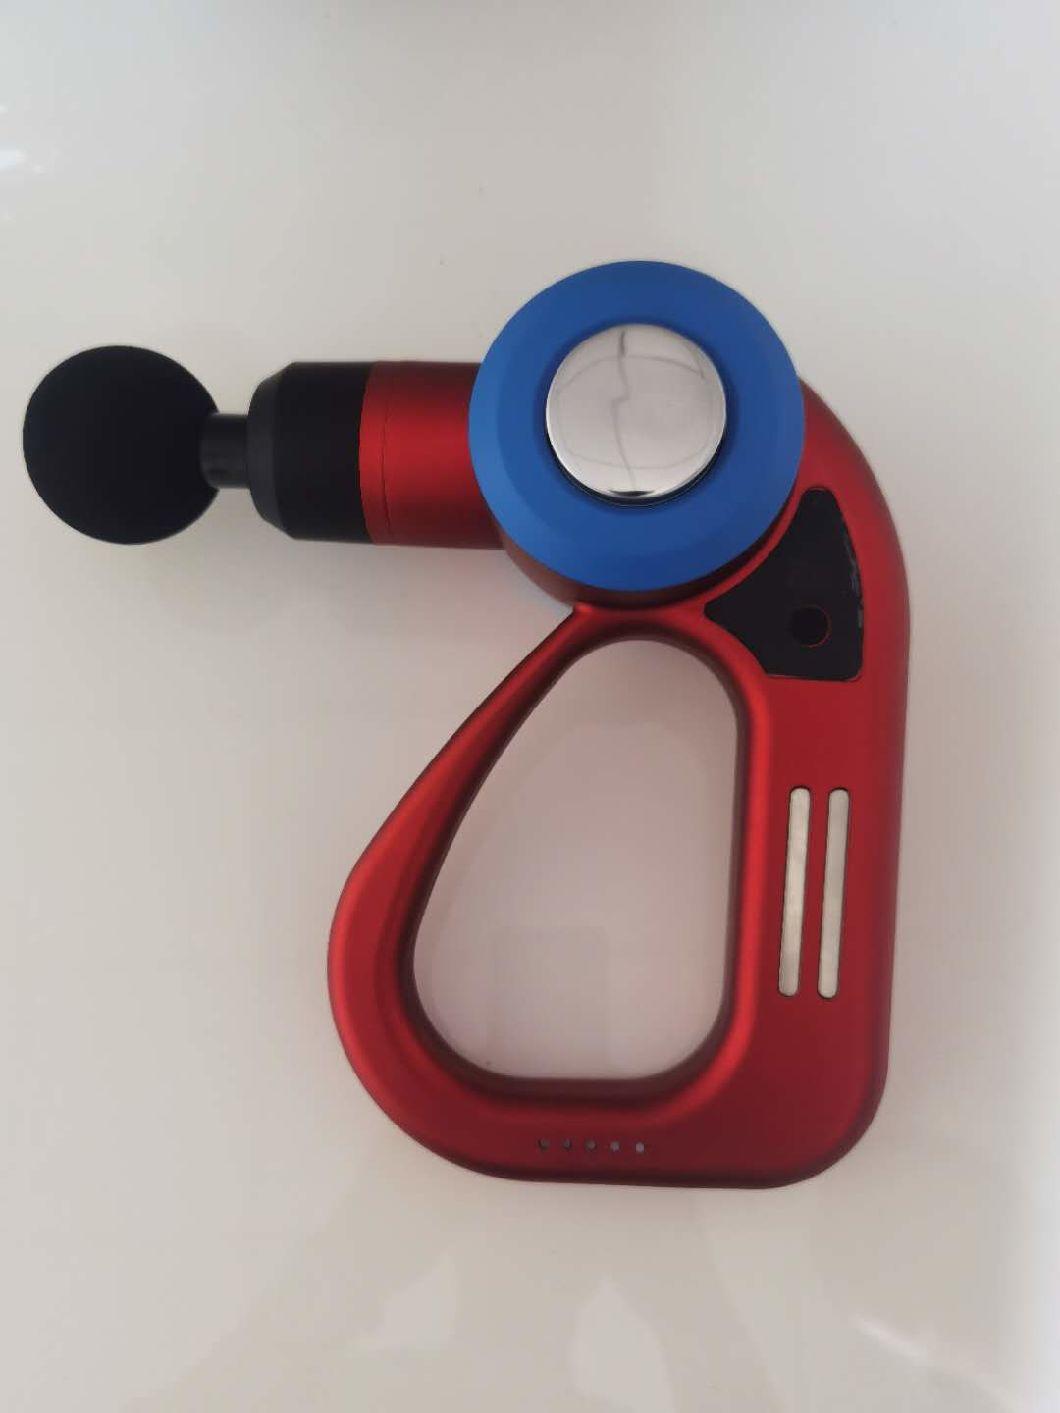 Newly Powerful Wireless Commercial Use Percussion Therapy Massage Gun